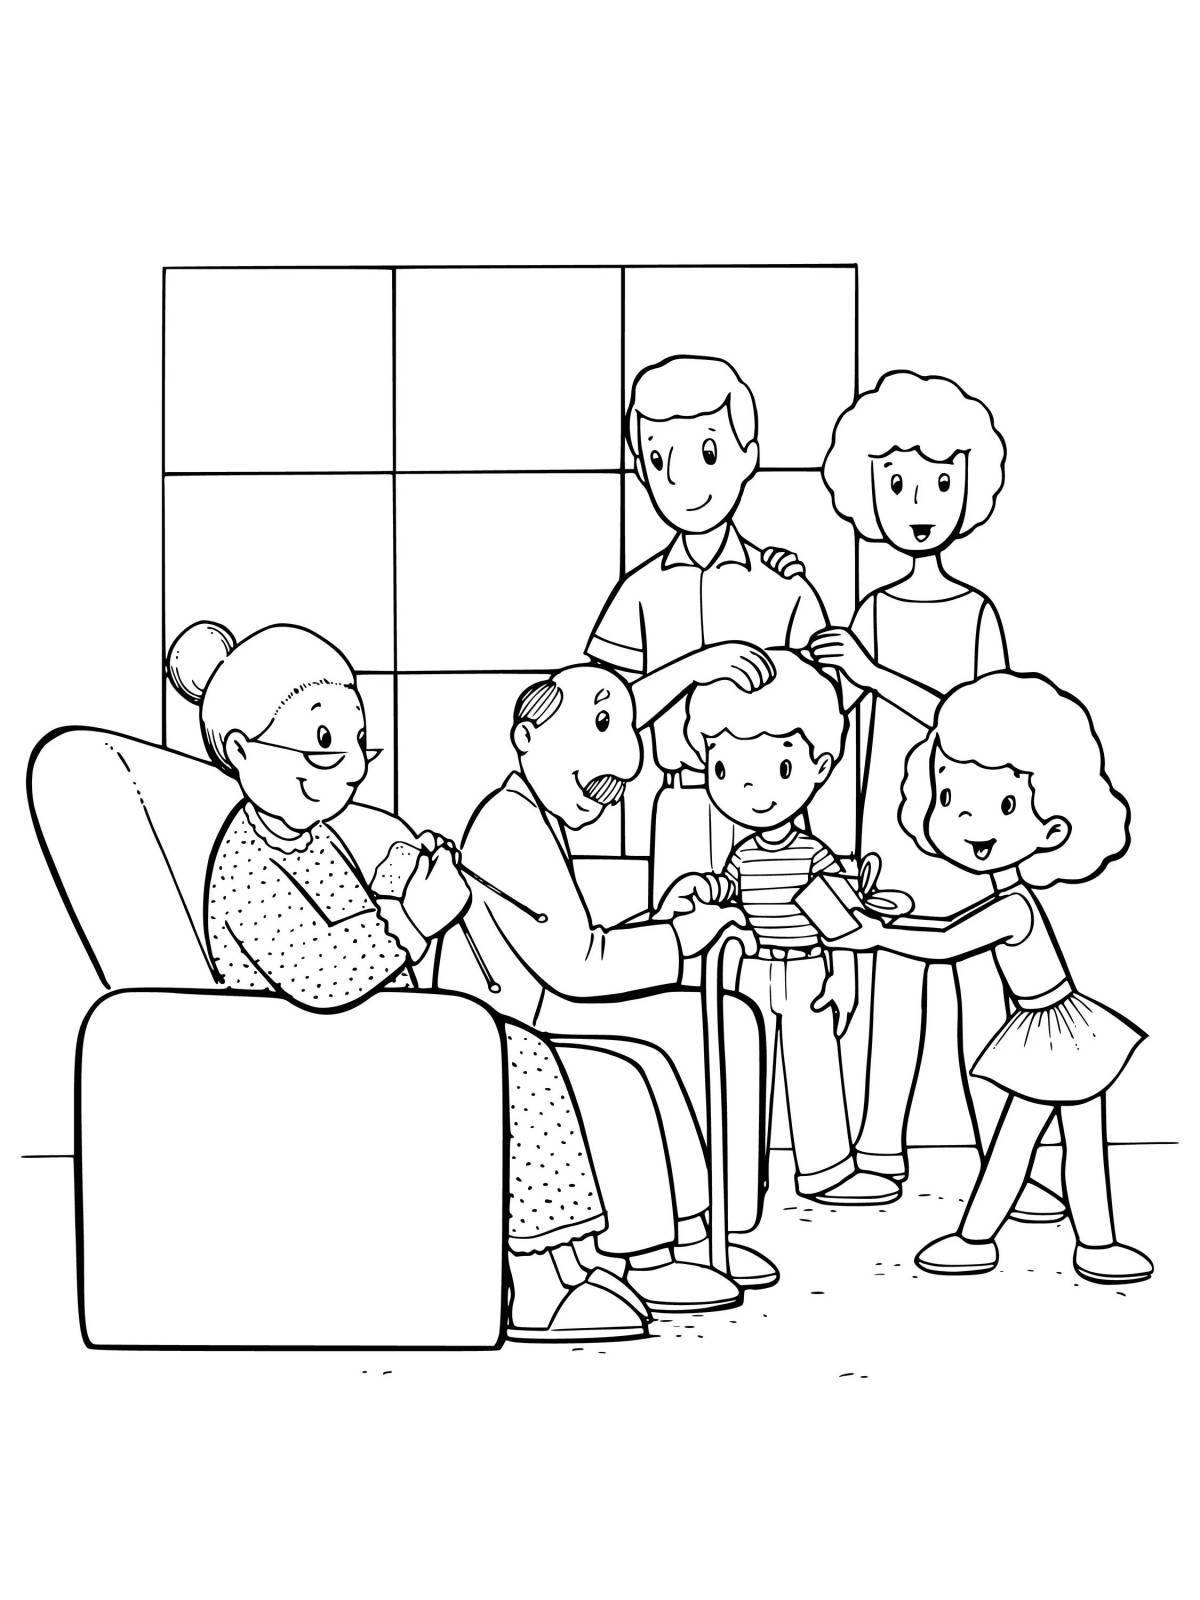 Shining family coloring book